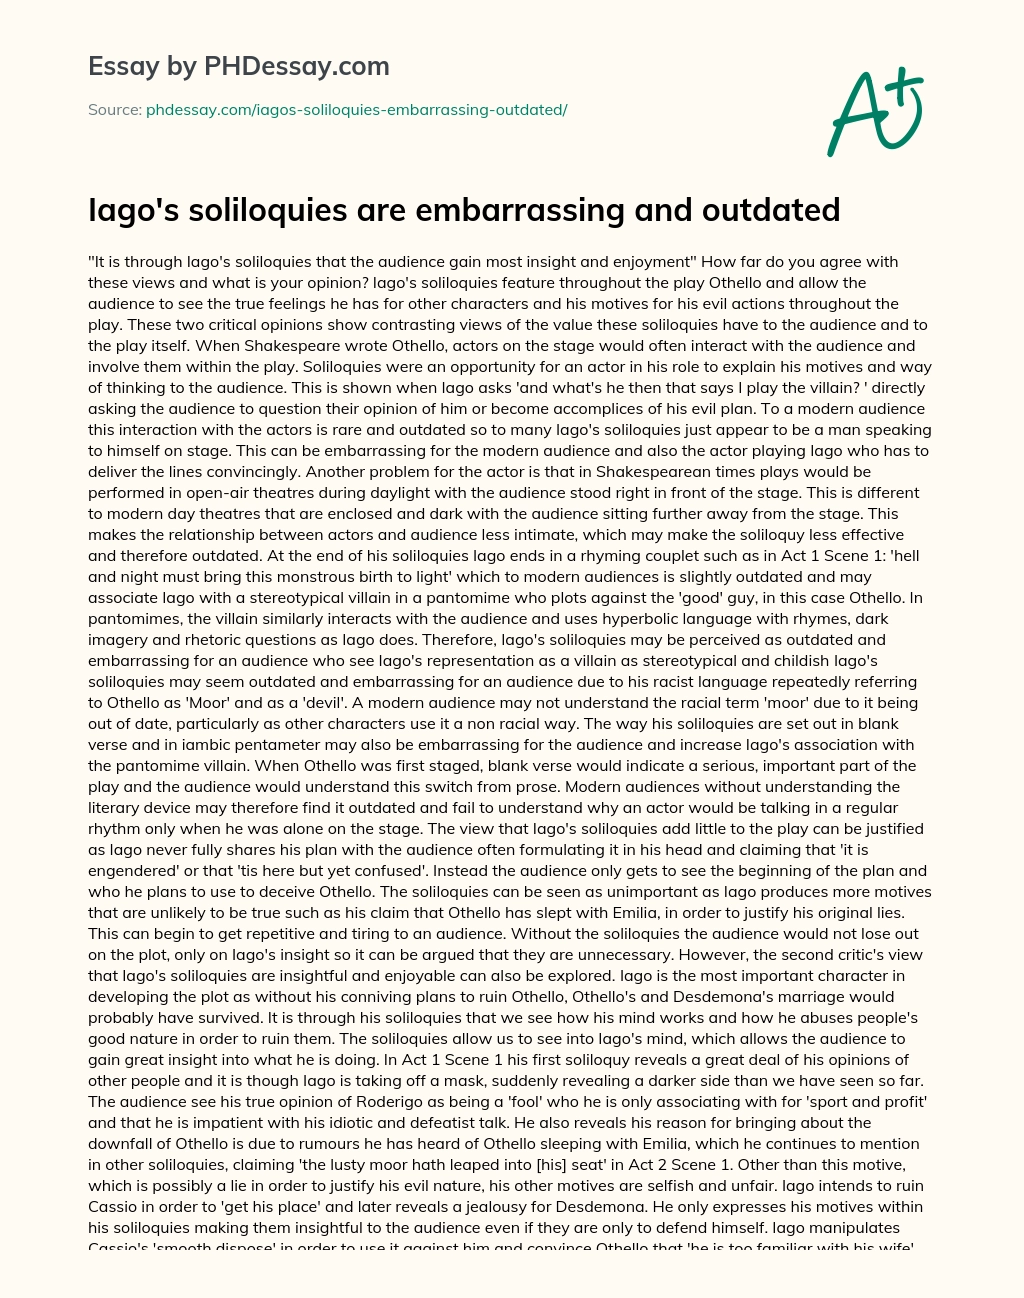 Iago’s soliloquies are embarrassing and outdated essay